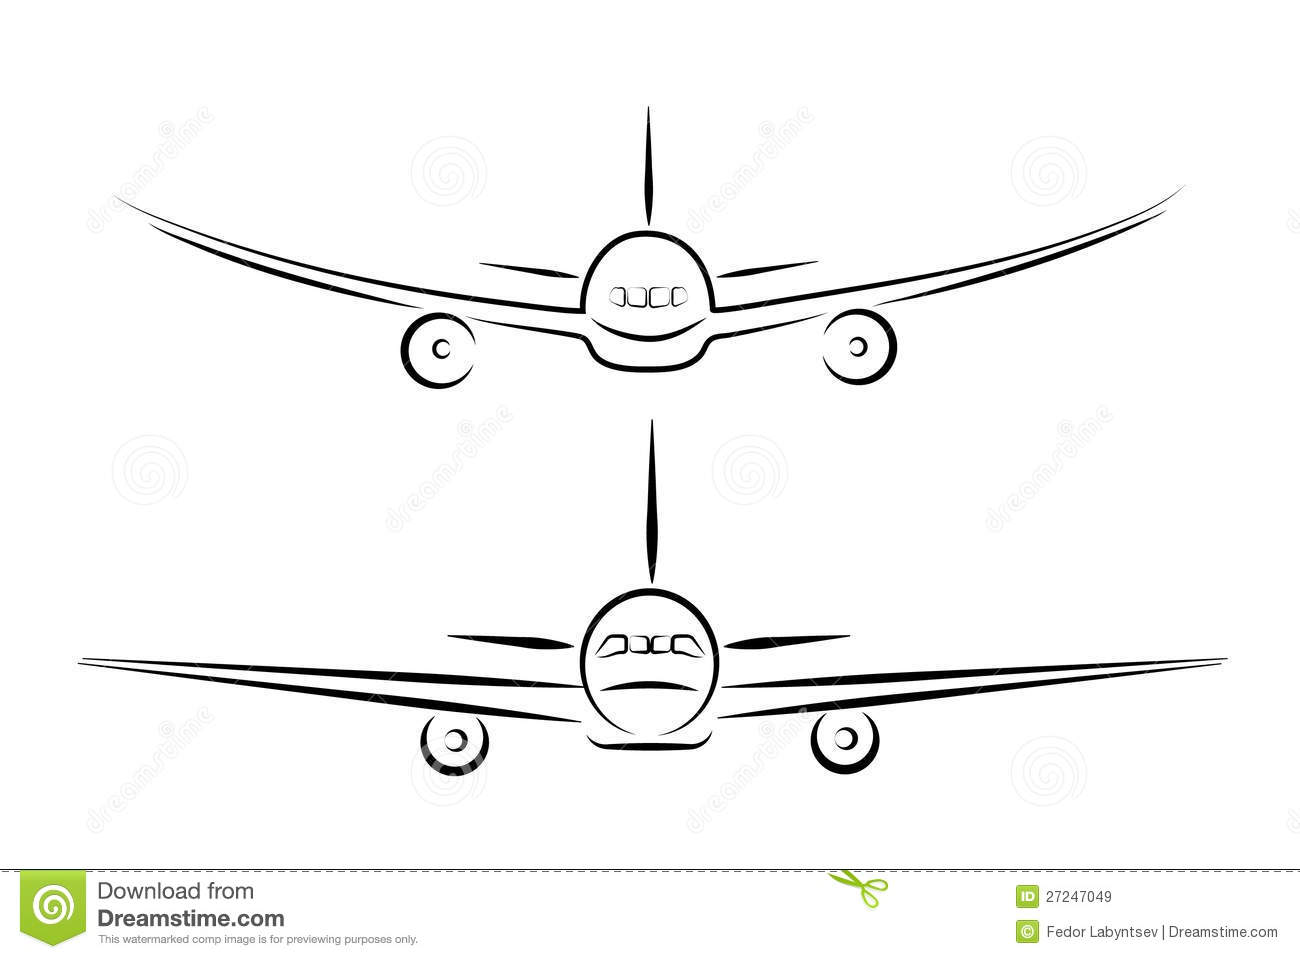 Plane Silhouette Royalty Free Stock Images   Image  27247049